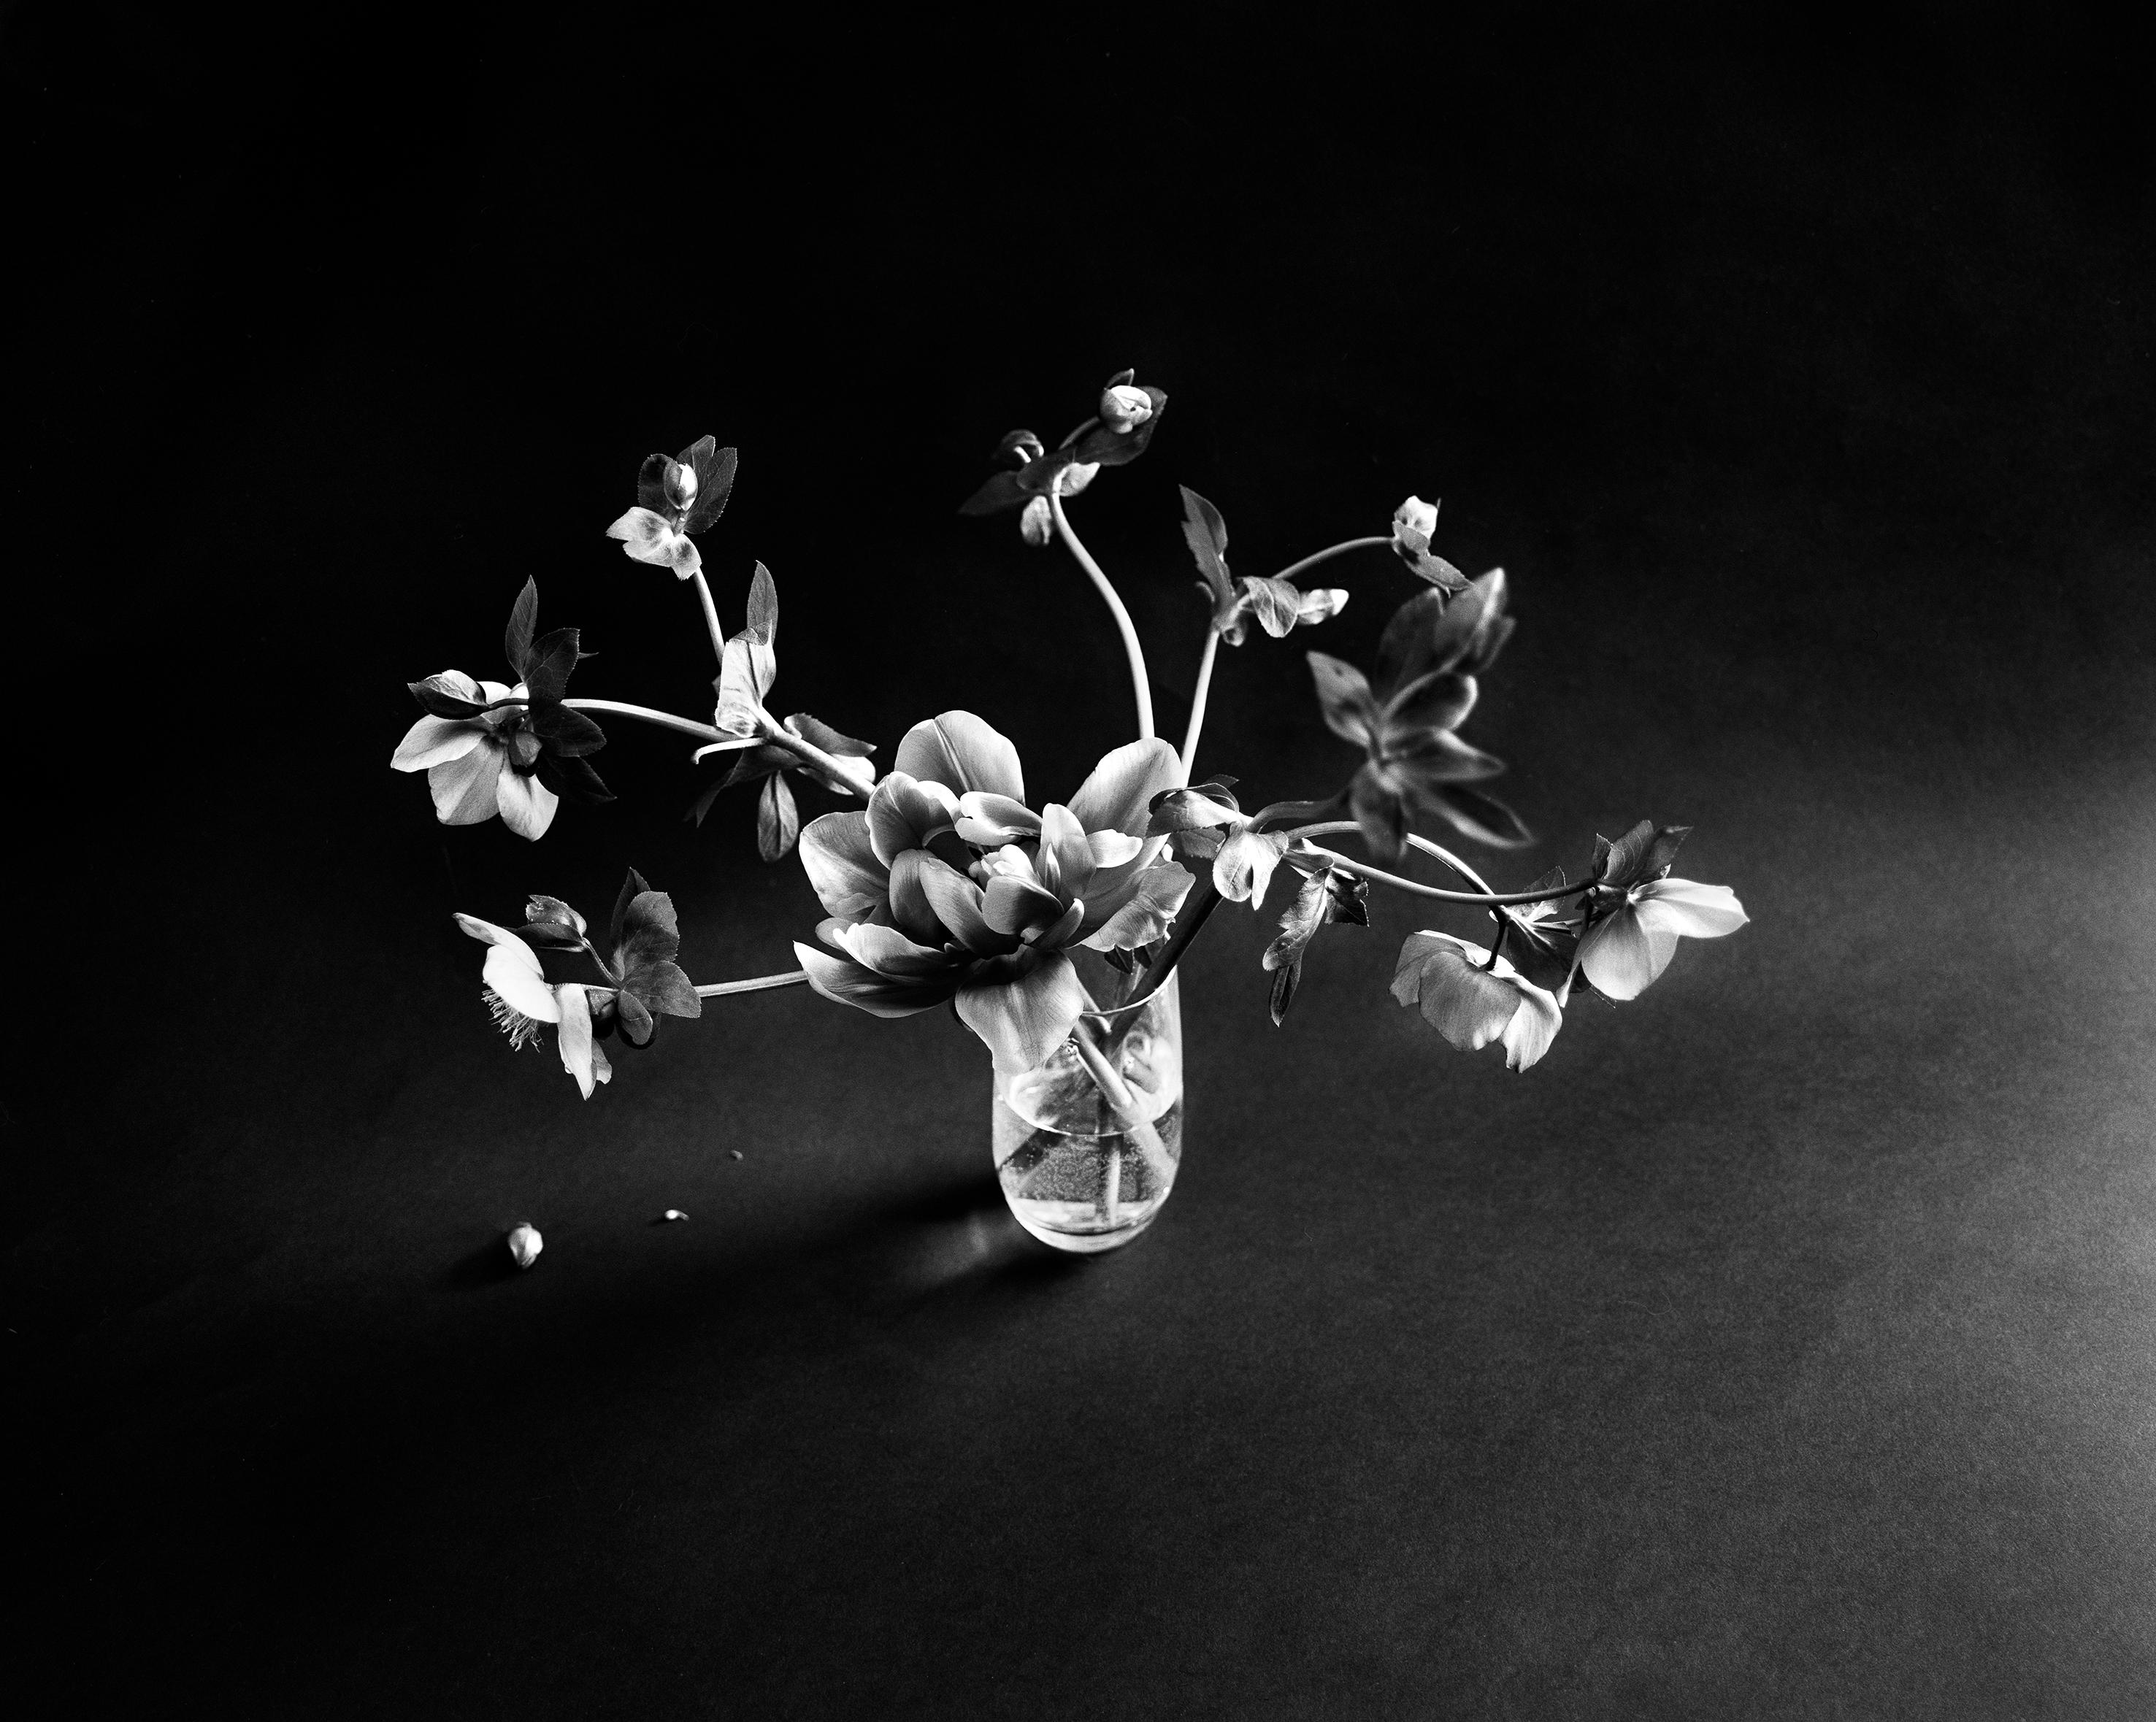 Ugne Pouwell Still-Life Photograph - Black Hellebore on Black - Floral photography, Limited edition of 20 